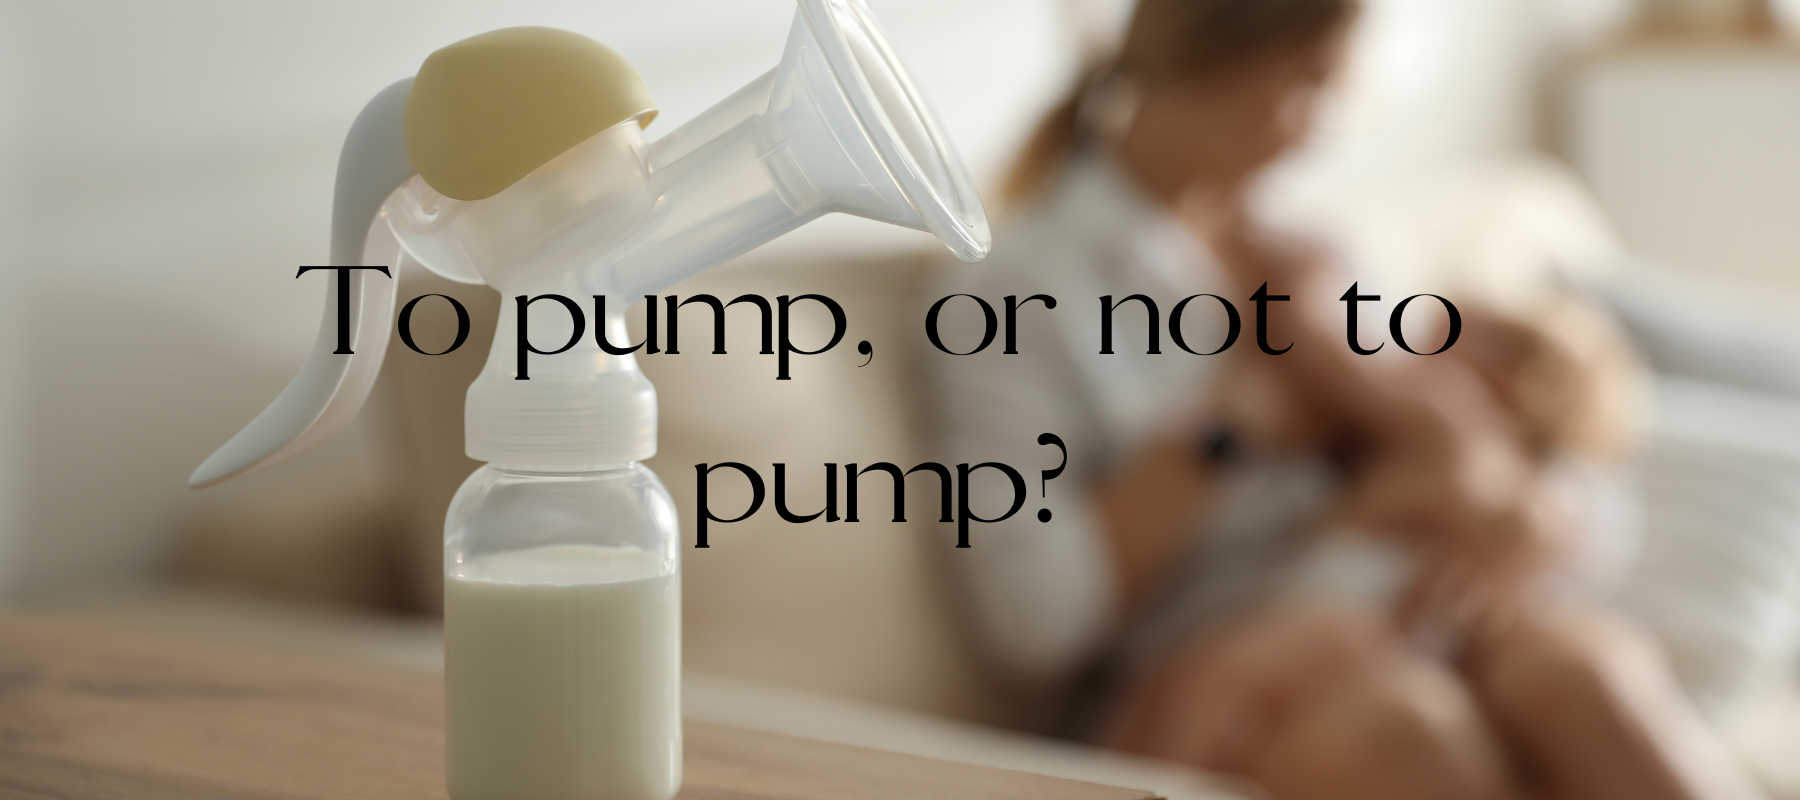 To pump, or not to pump?